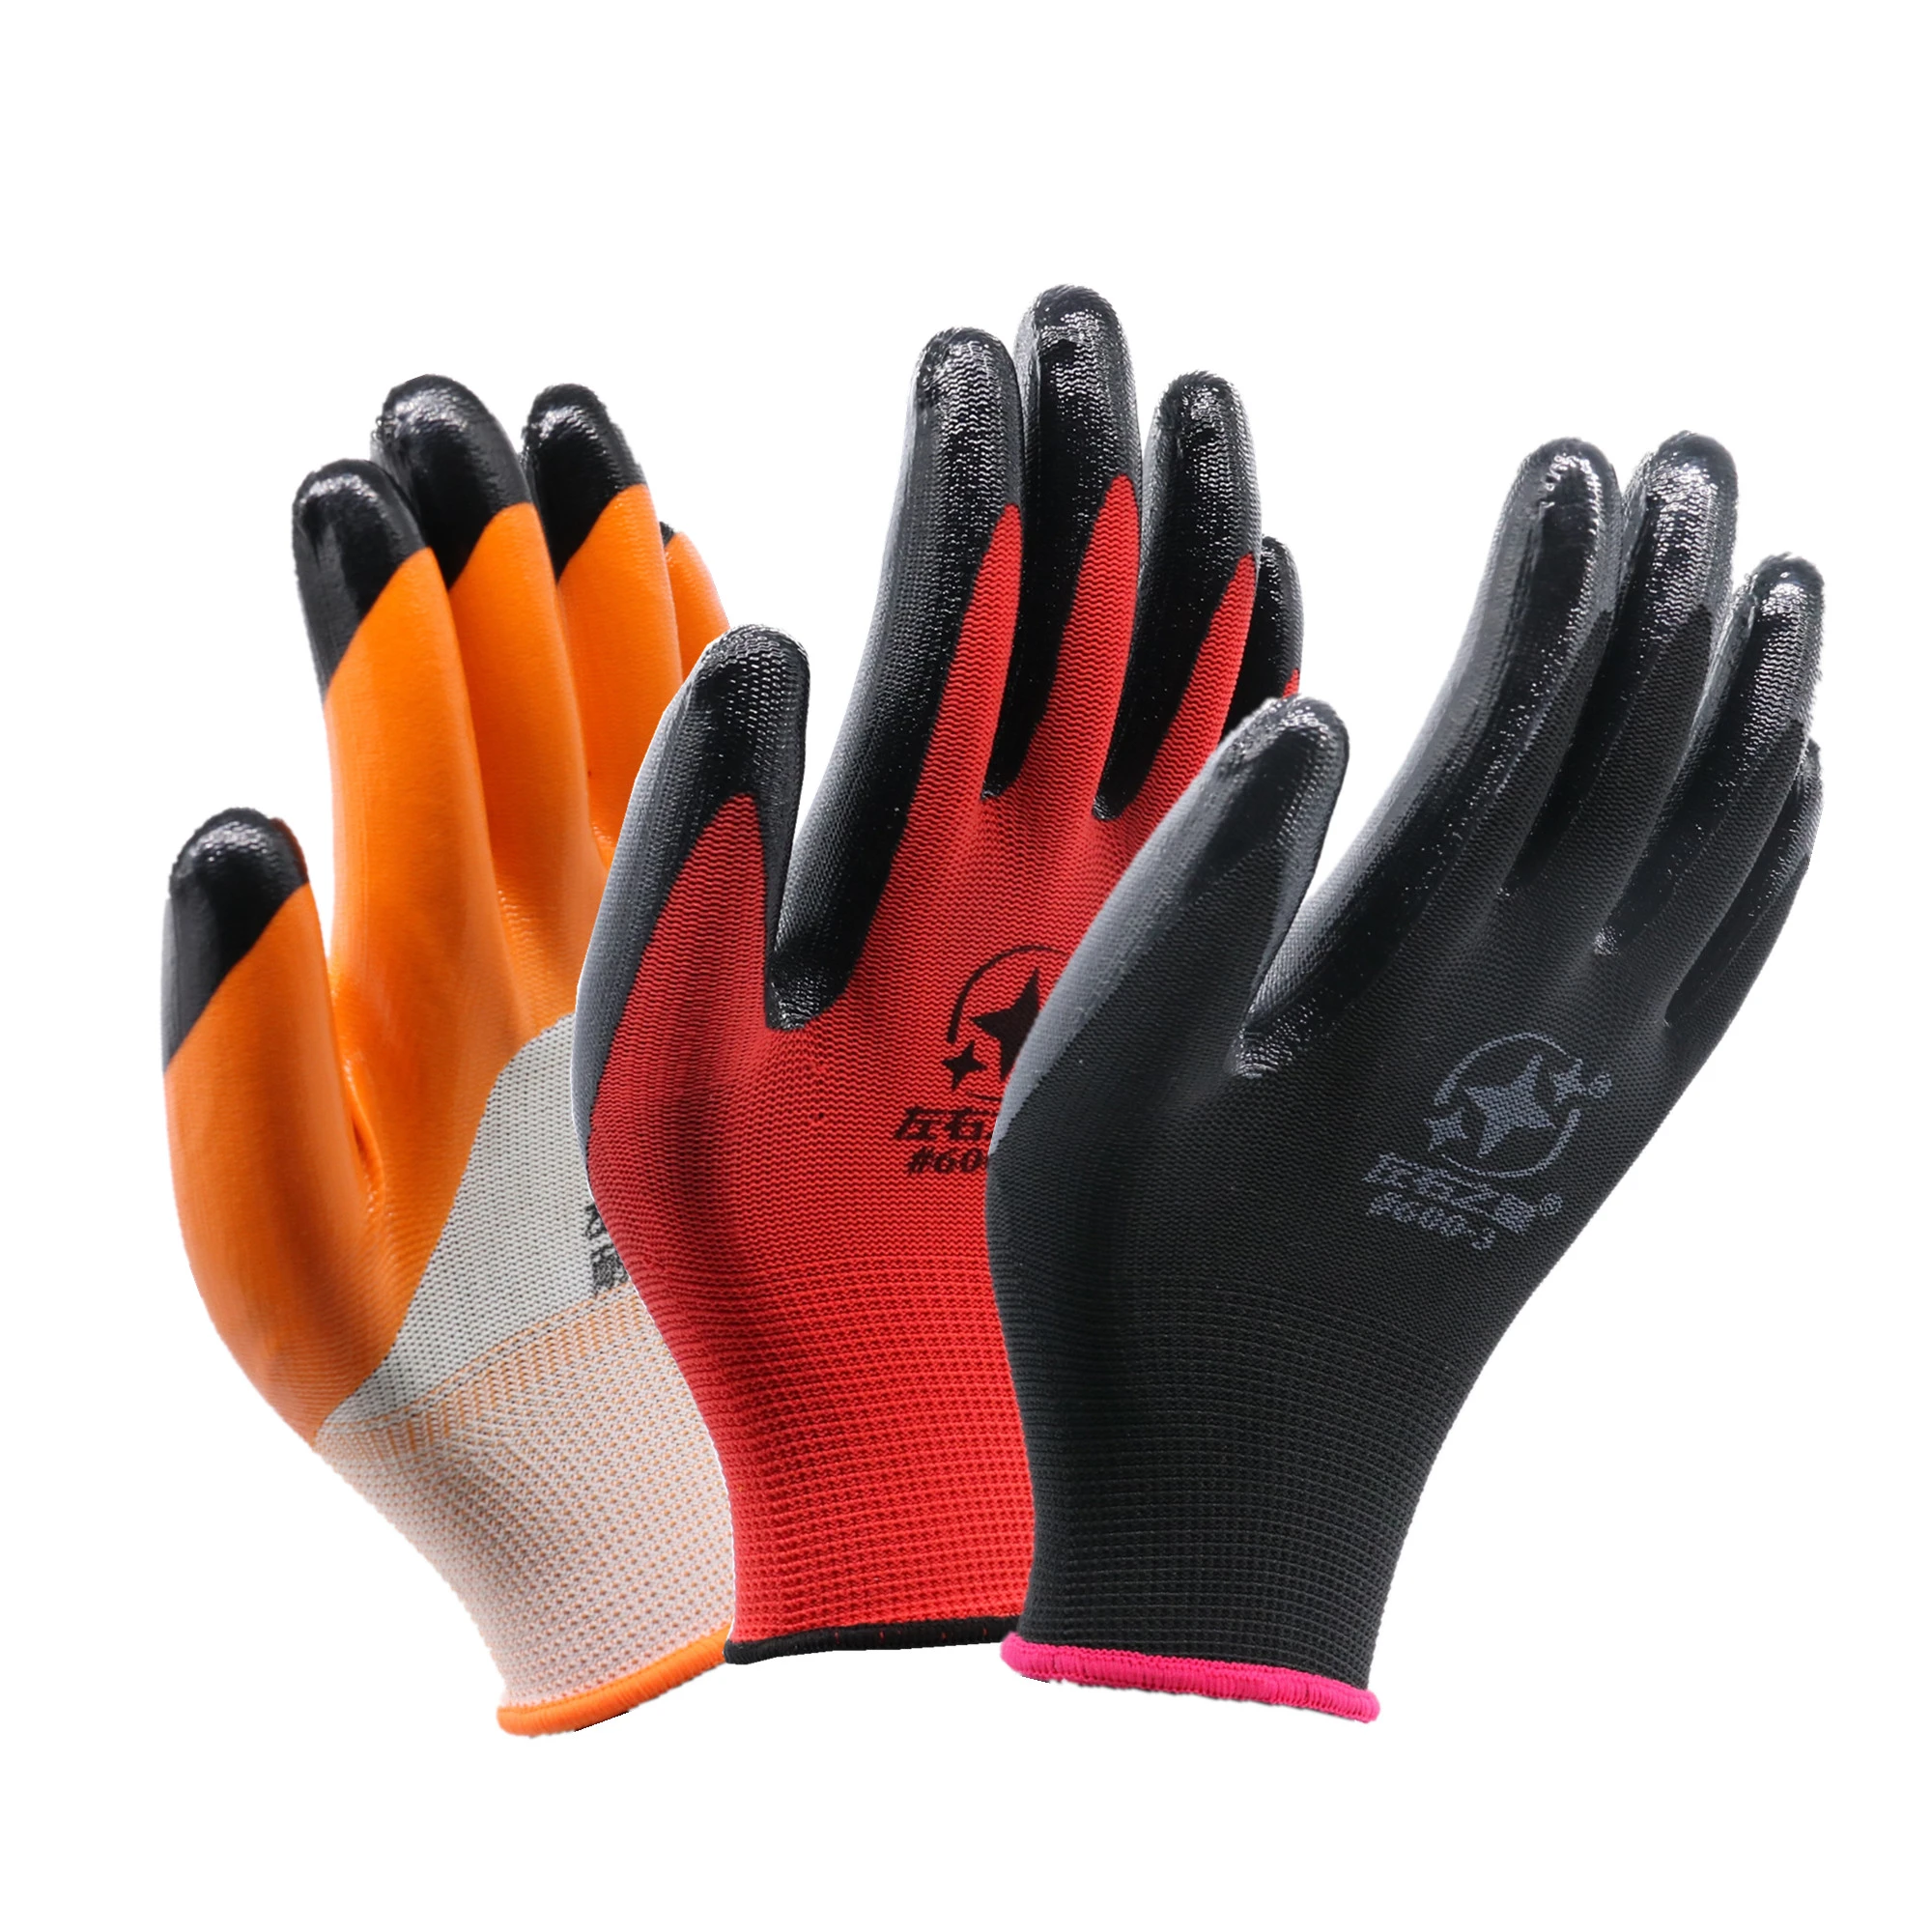 Enhanced nylon 13 needle cotton thread protection dip rubber wear-resistant, oil-resistant, acid-resistant working gloves